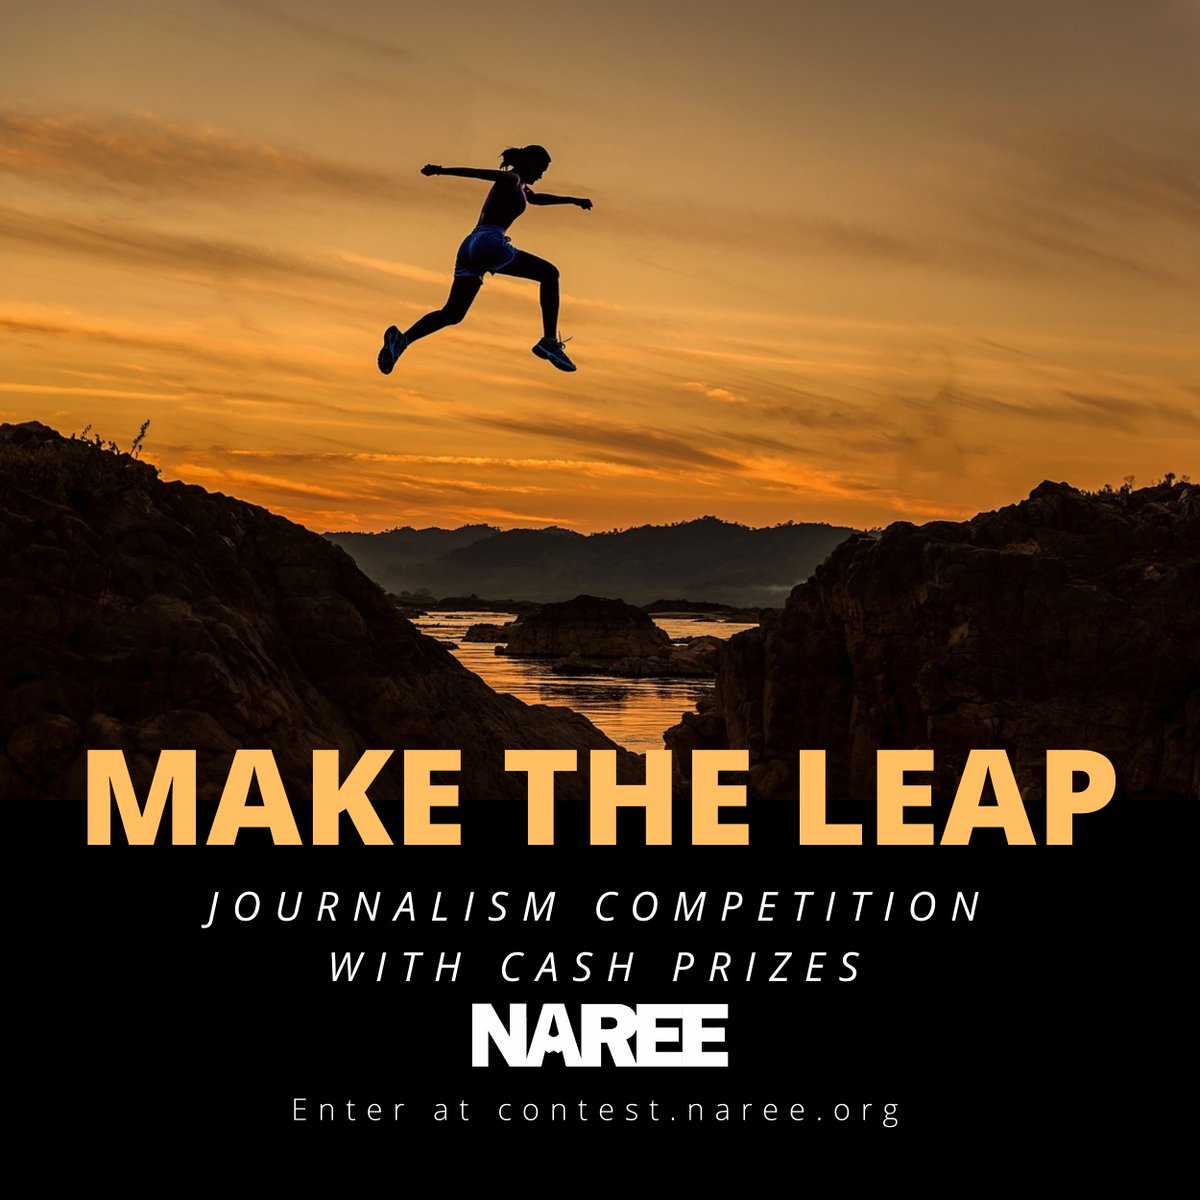 It's leap day, which means you have an extra day to enter NAREE's journalism competition before the deadline tomorrow (3/1) at 11:59pm EST. Make the leap now and enter at contest.naree.org to win cash prizes in 29 categories.